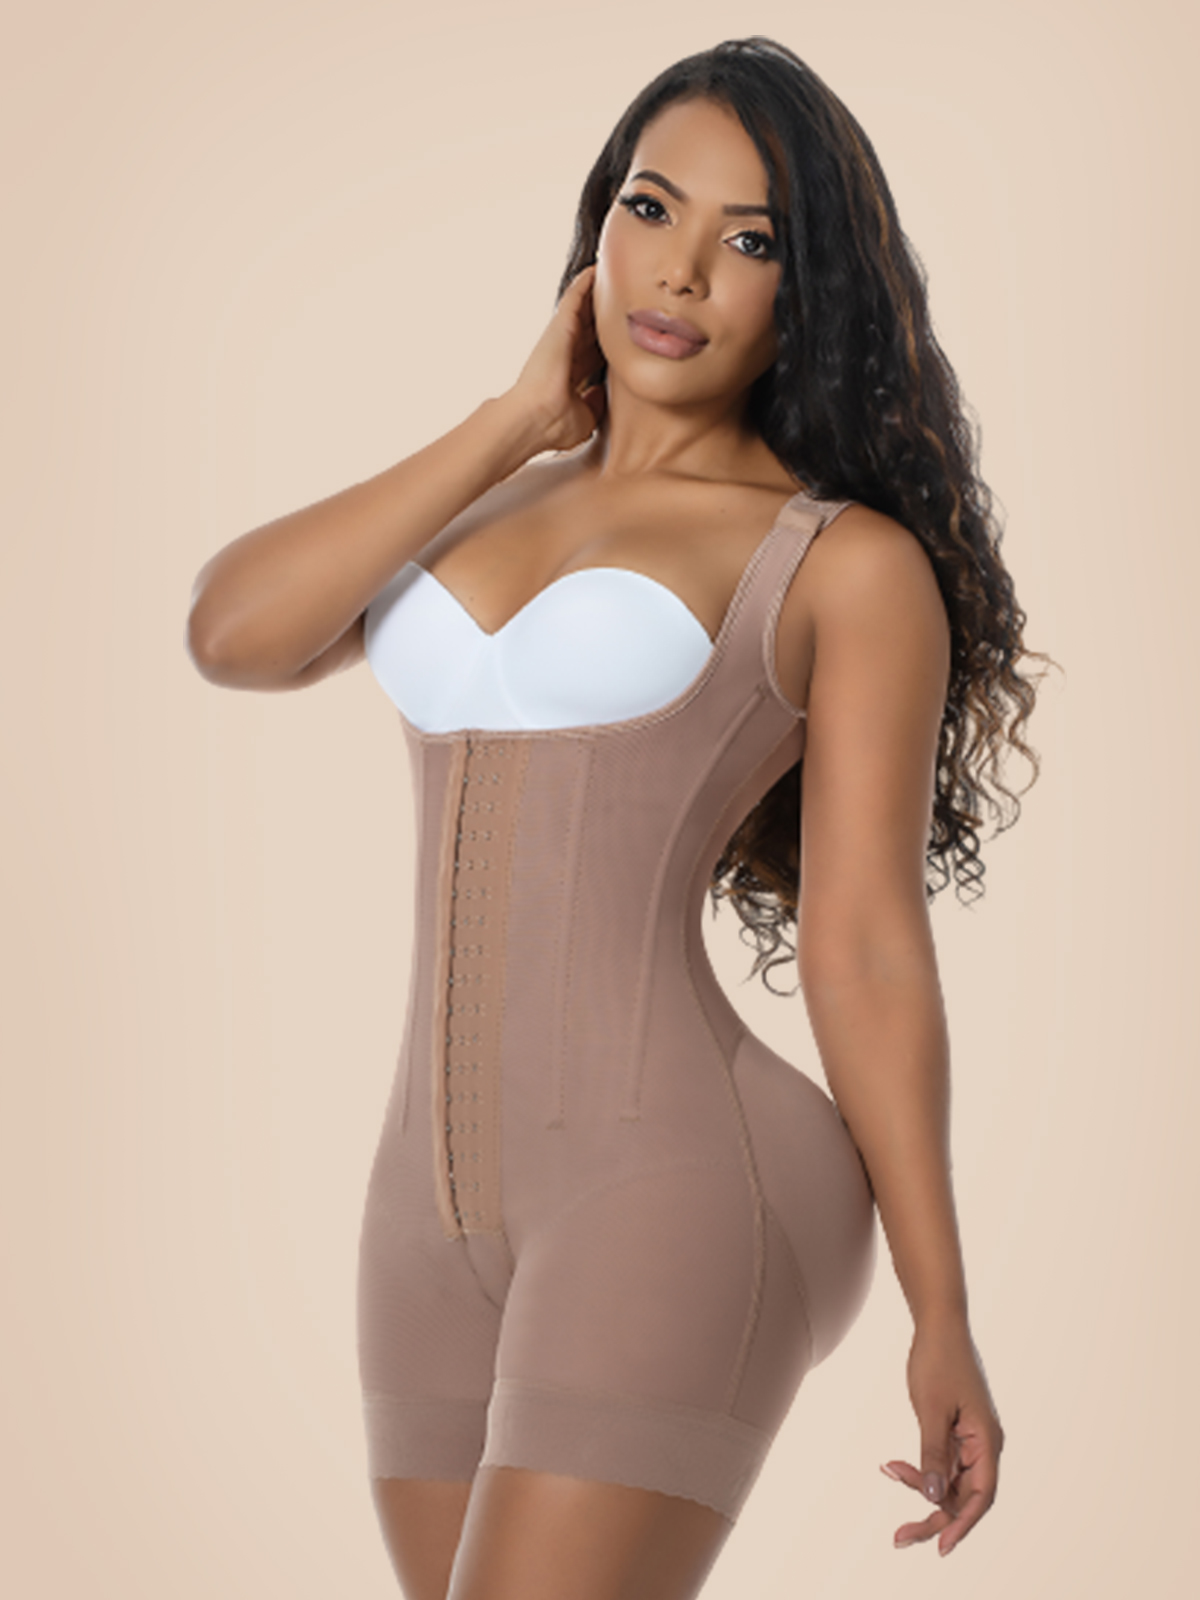 High Compression Butt Lifter Tummy Control Shapewear Shorts-ChicCurve